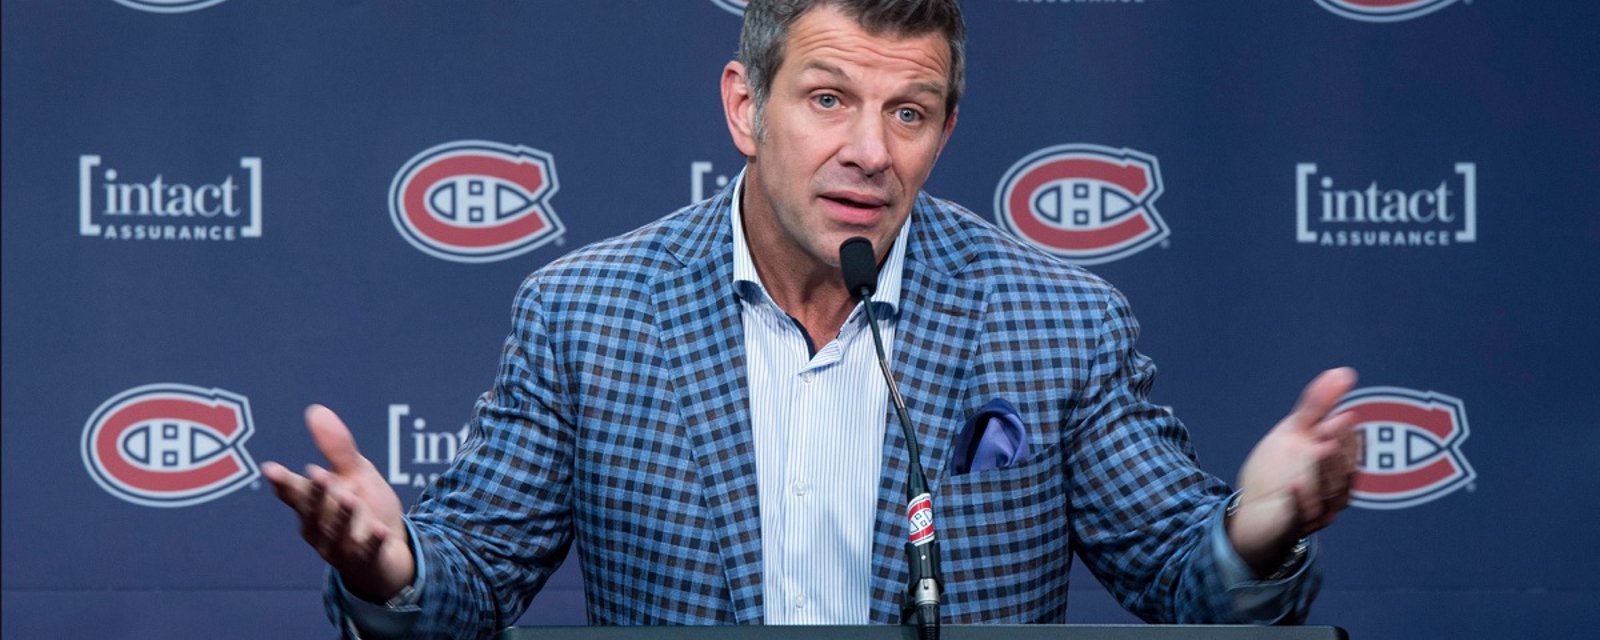 Breaking: Former Habs player says the Canadiens are preparing a “hostile” offer sheet.